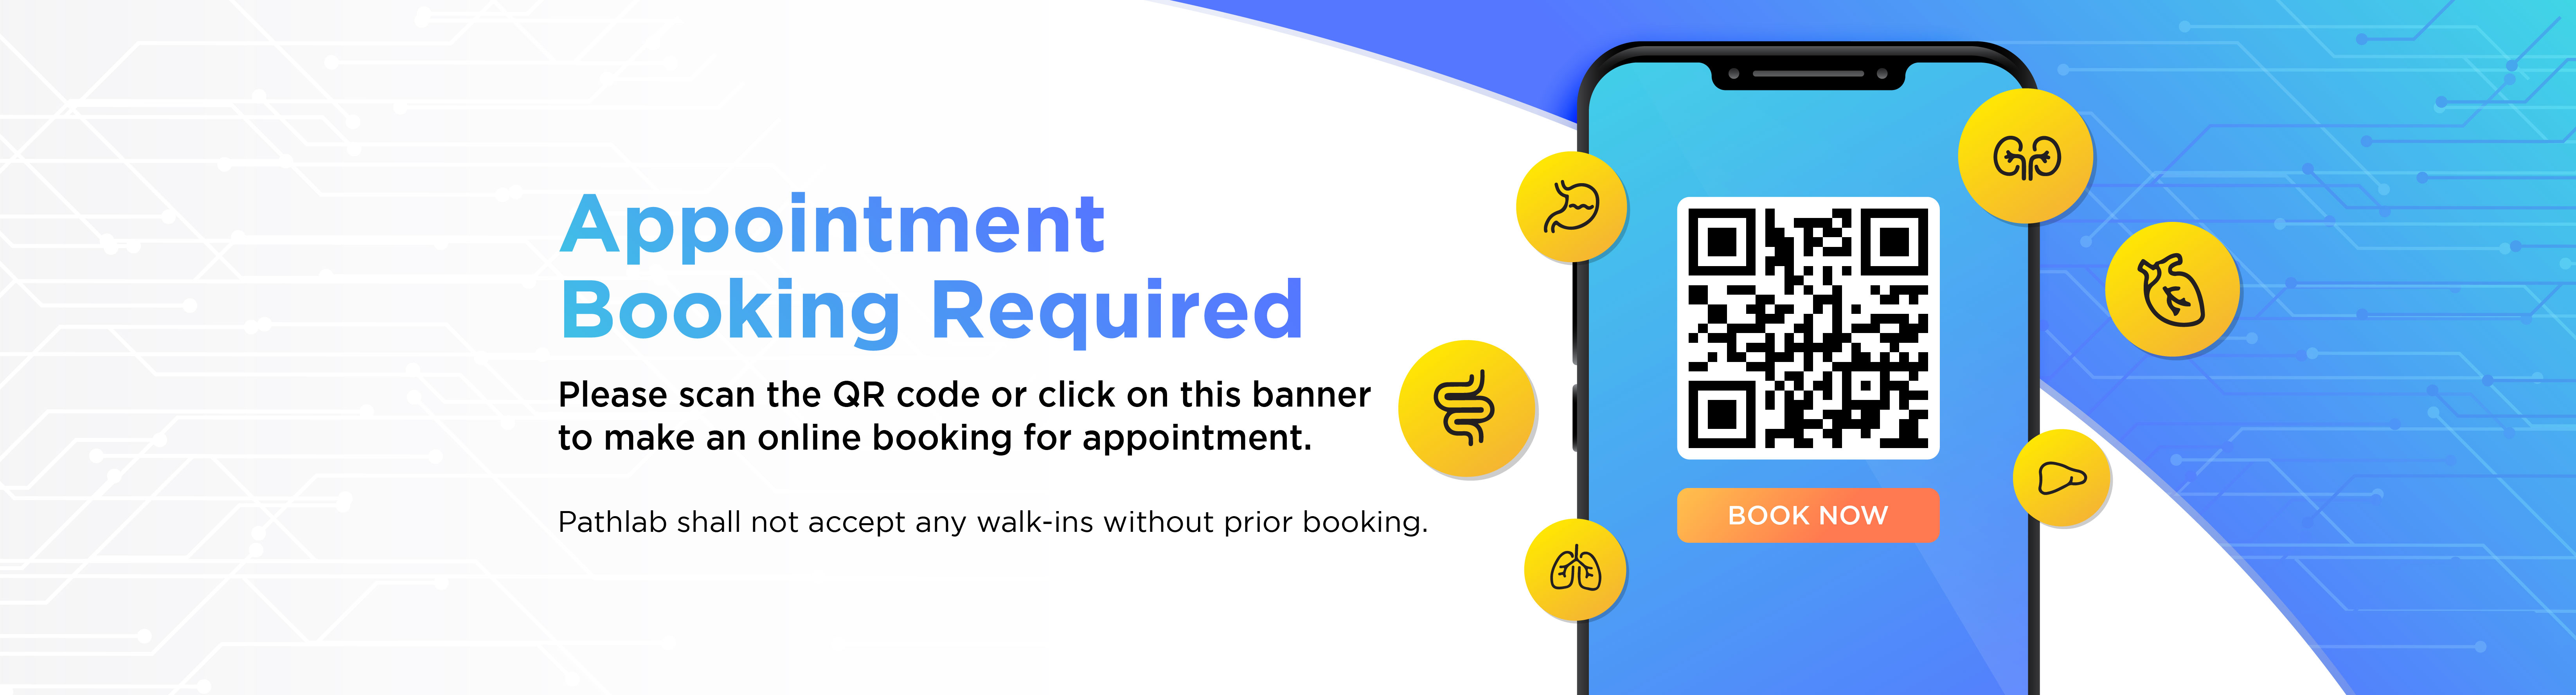 Appointment Booking Required